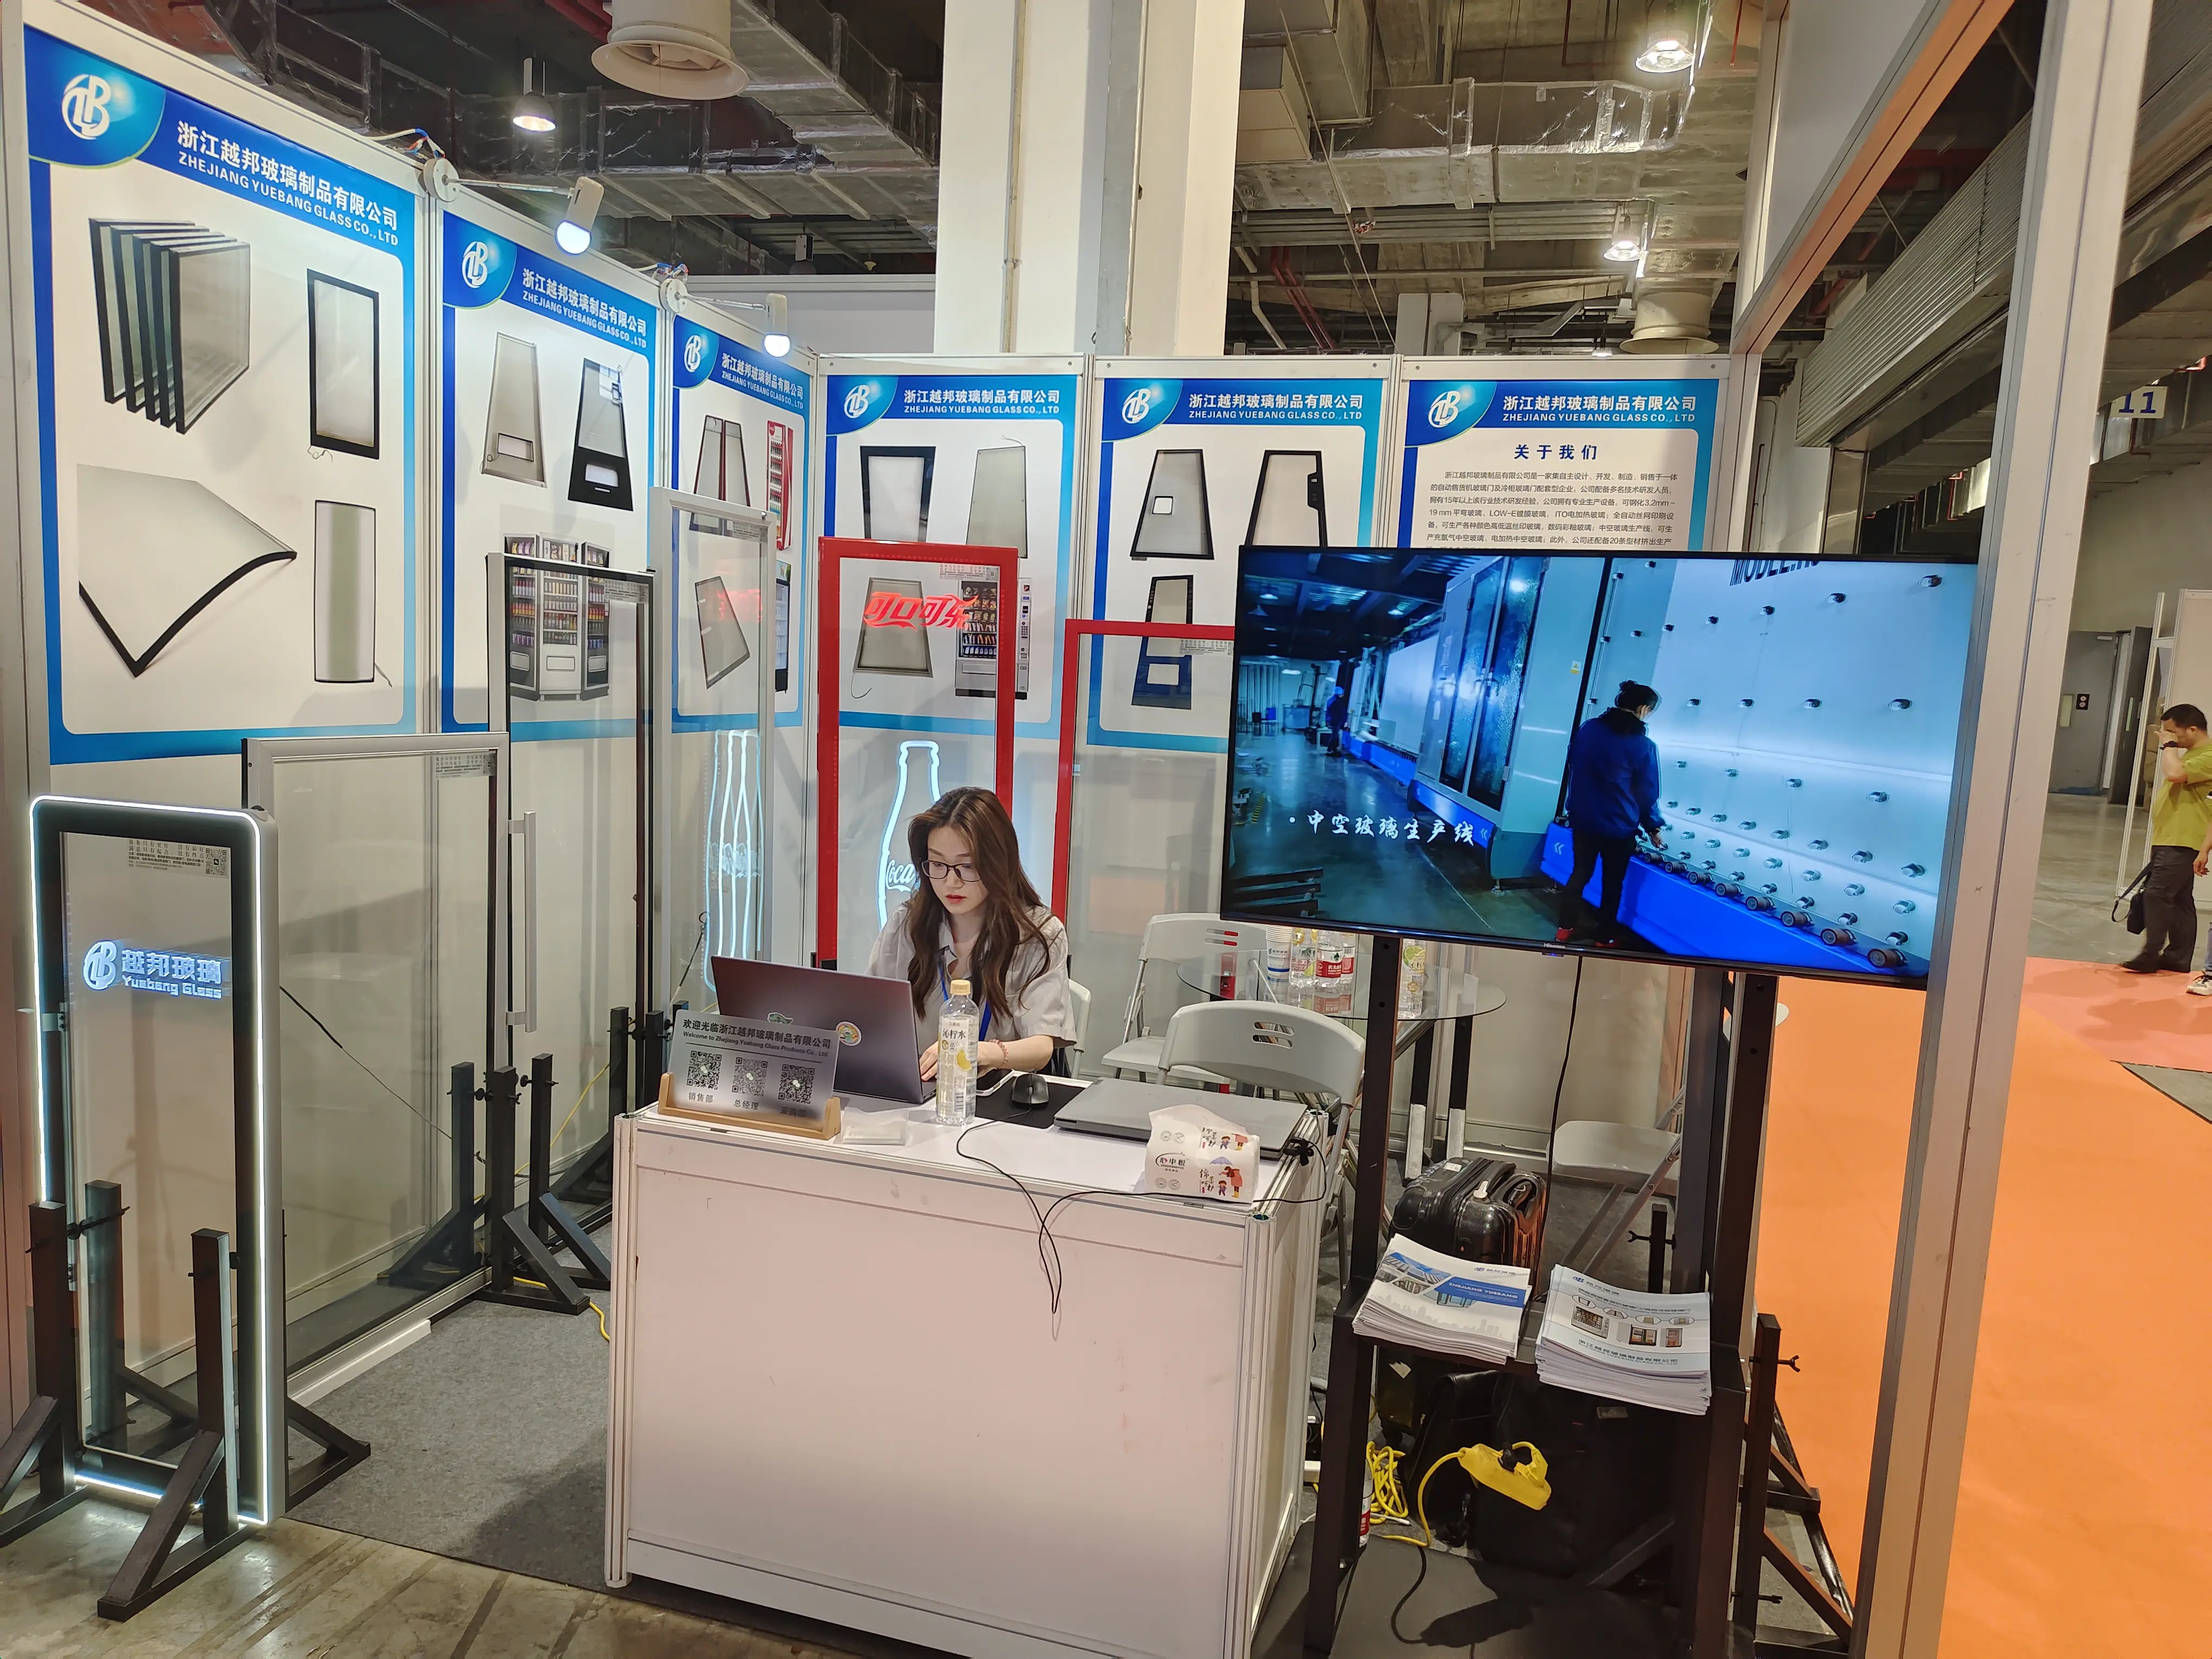 Yuebang Glass Shines as Supplier and Manufacturer at 6th China Unattended Retail Event